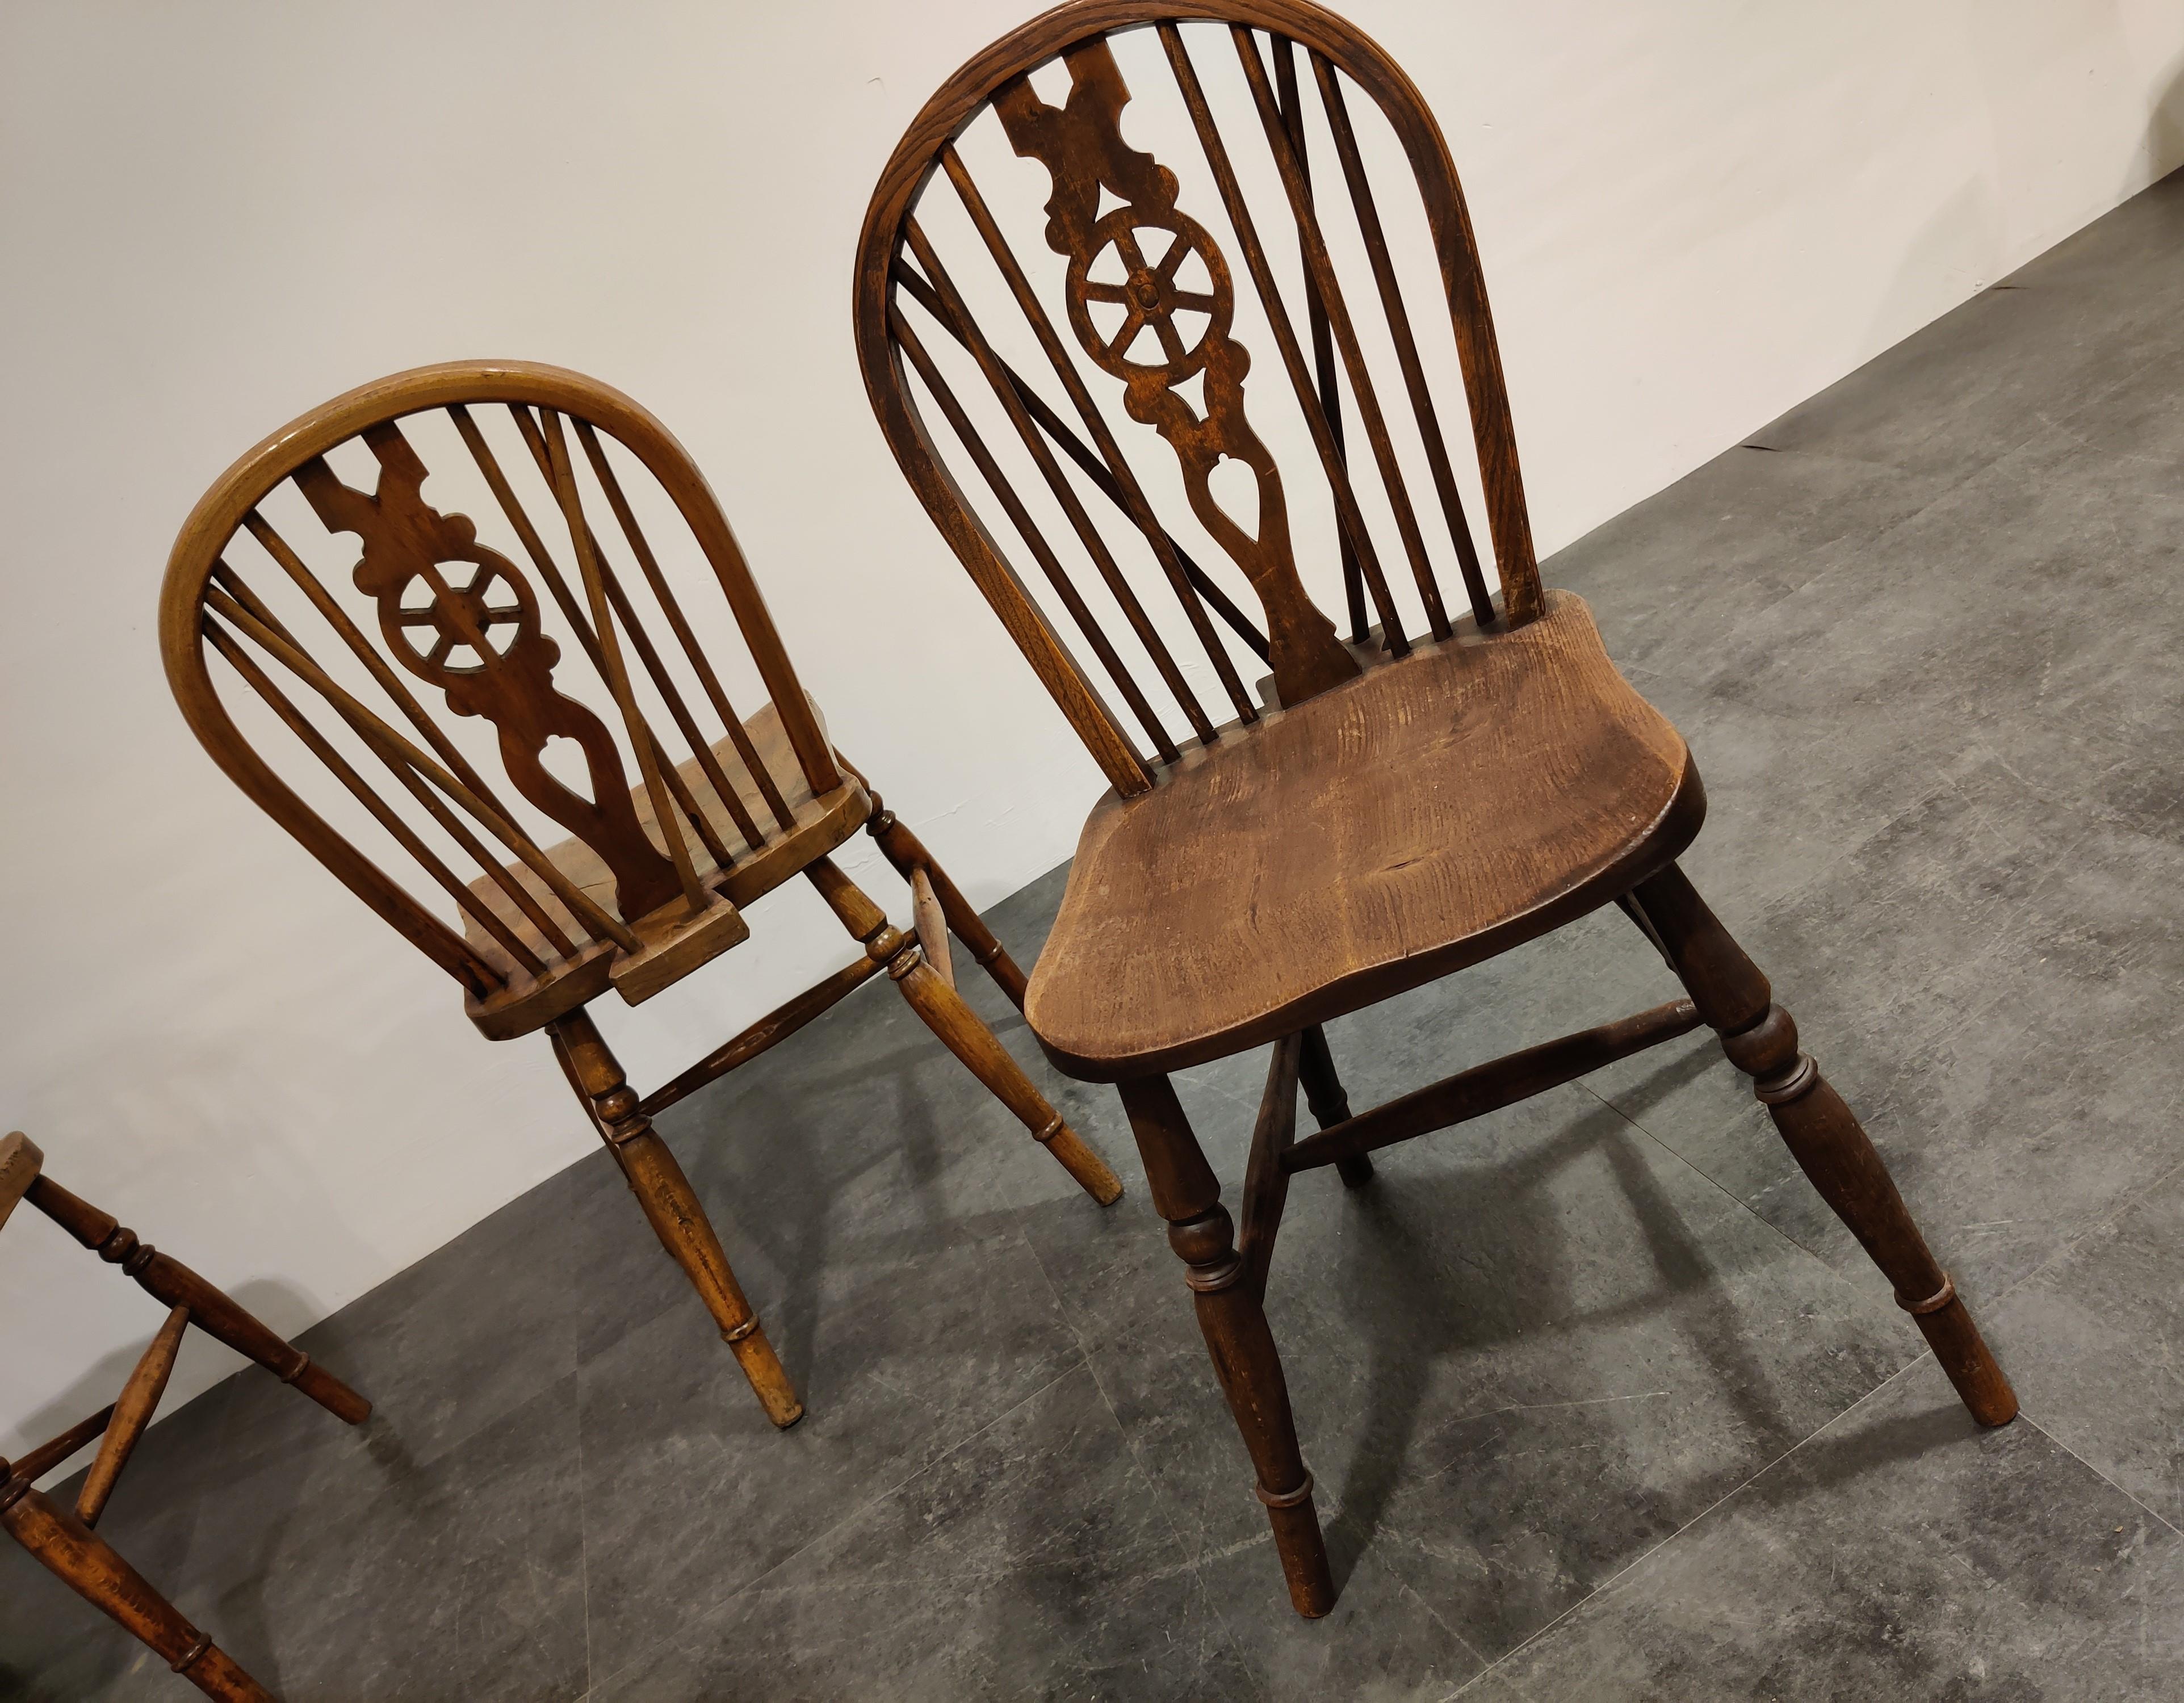 Set of 4 spindle back Ercol dining chairs.

The chairs are beautifully crafted with an eye for details and are made of beech and elm wood.

Timeless pieces that gives an antique/vintage touch to your interior which mixes well with modern day